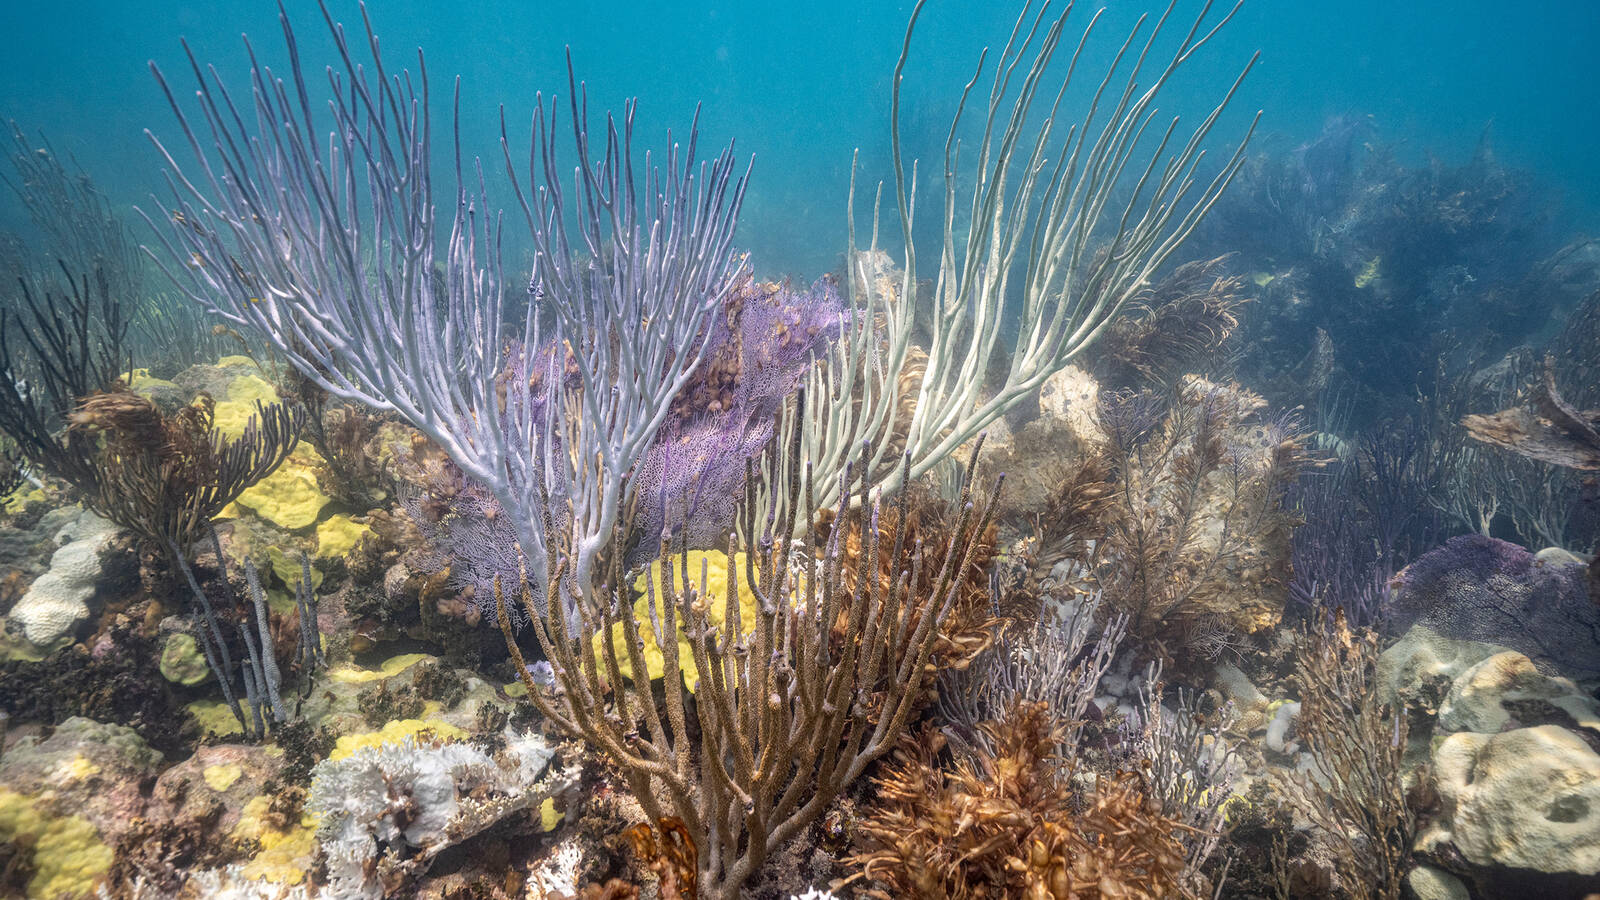 How does overfishing threaten coral reefs?